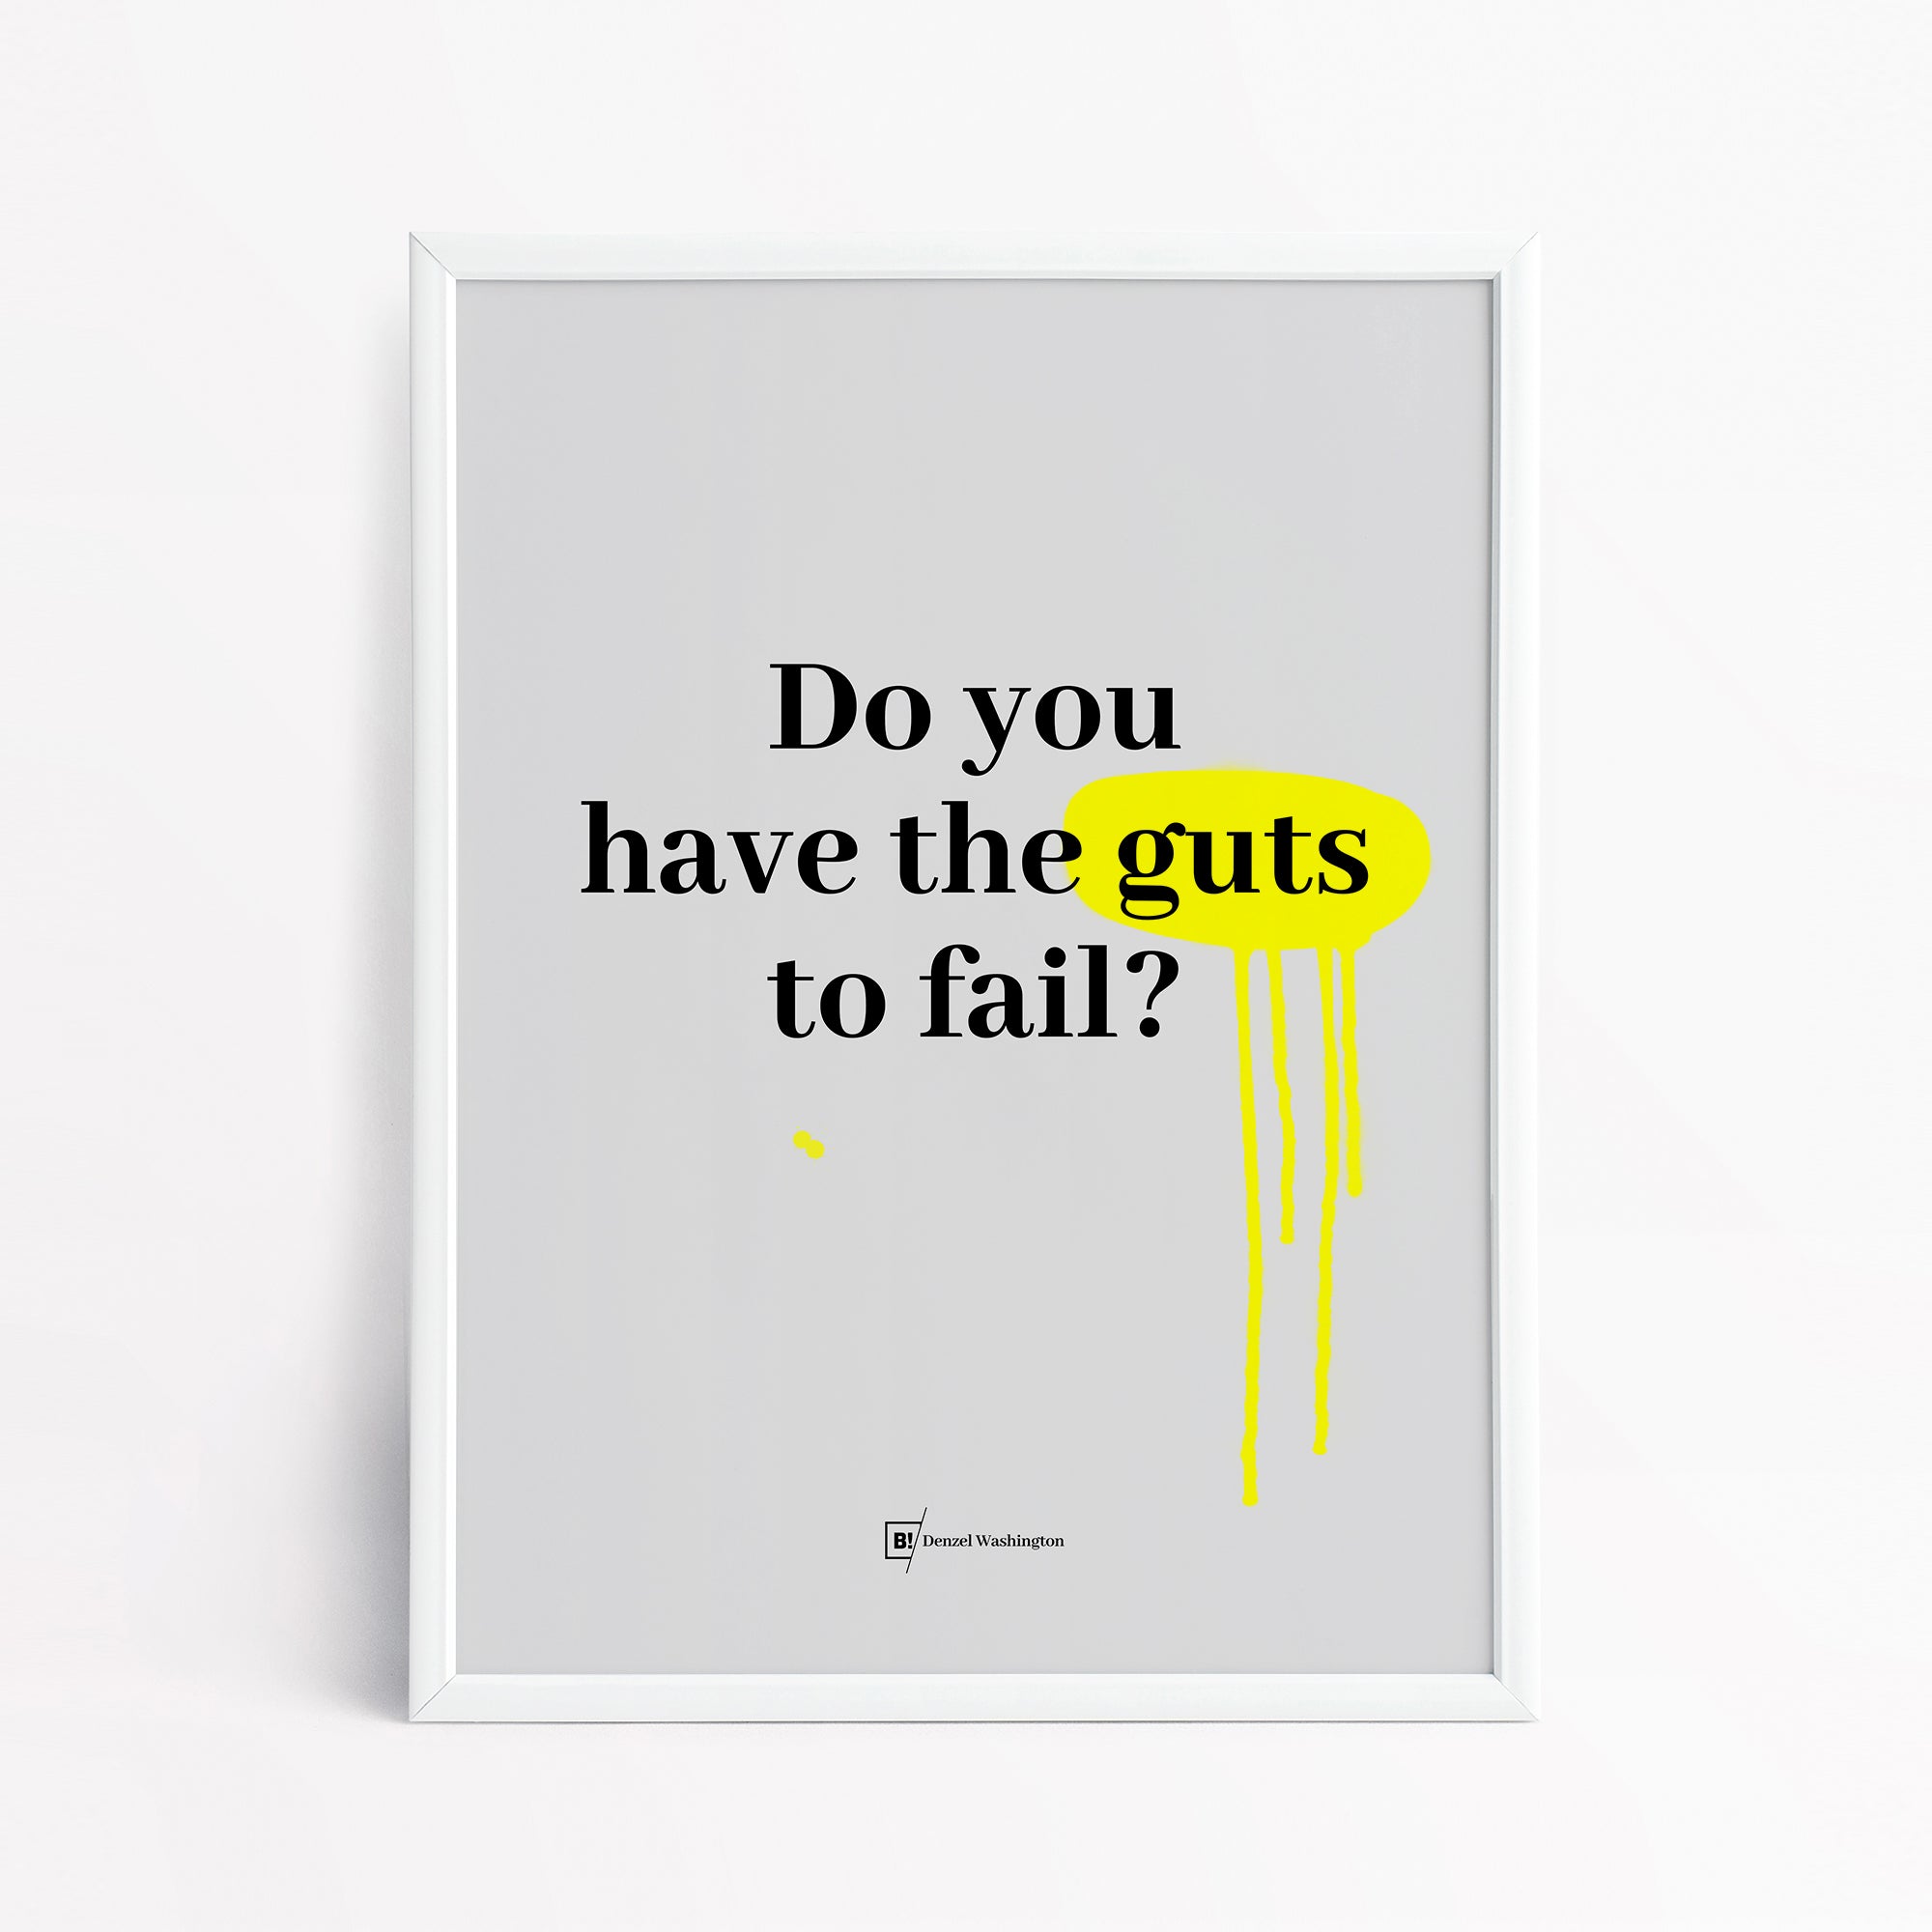 Be inspired by Denzel Washington's famous "Do you have the guts to fail?" quote art print. This artwork was printed using the giclée process on archival acid-free paper and is presented in a simple white frame that captures its timeless beauty in every detail.